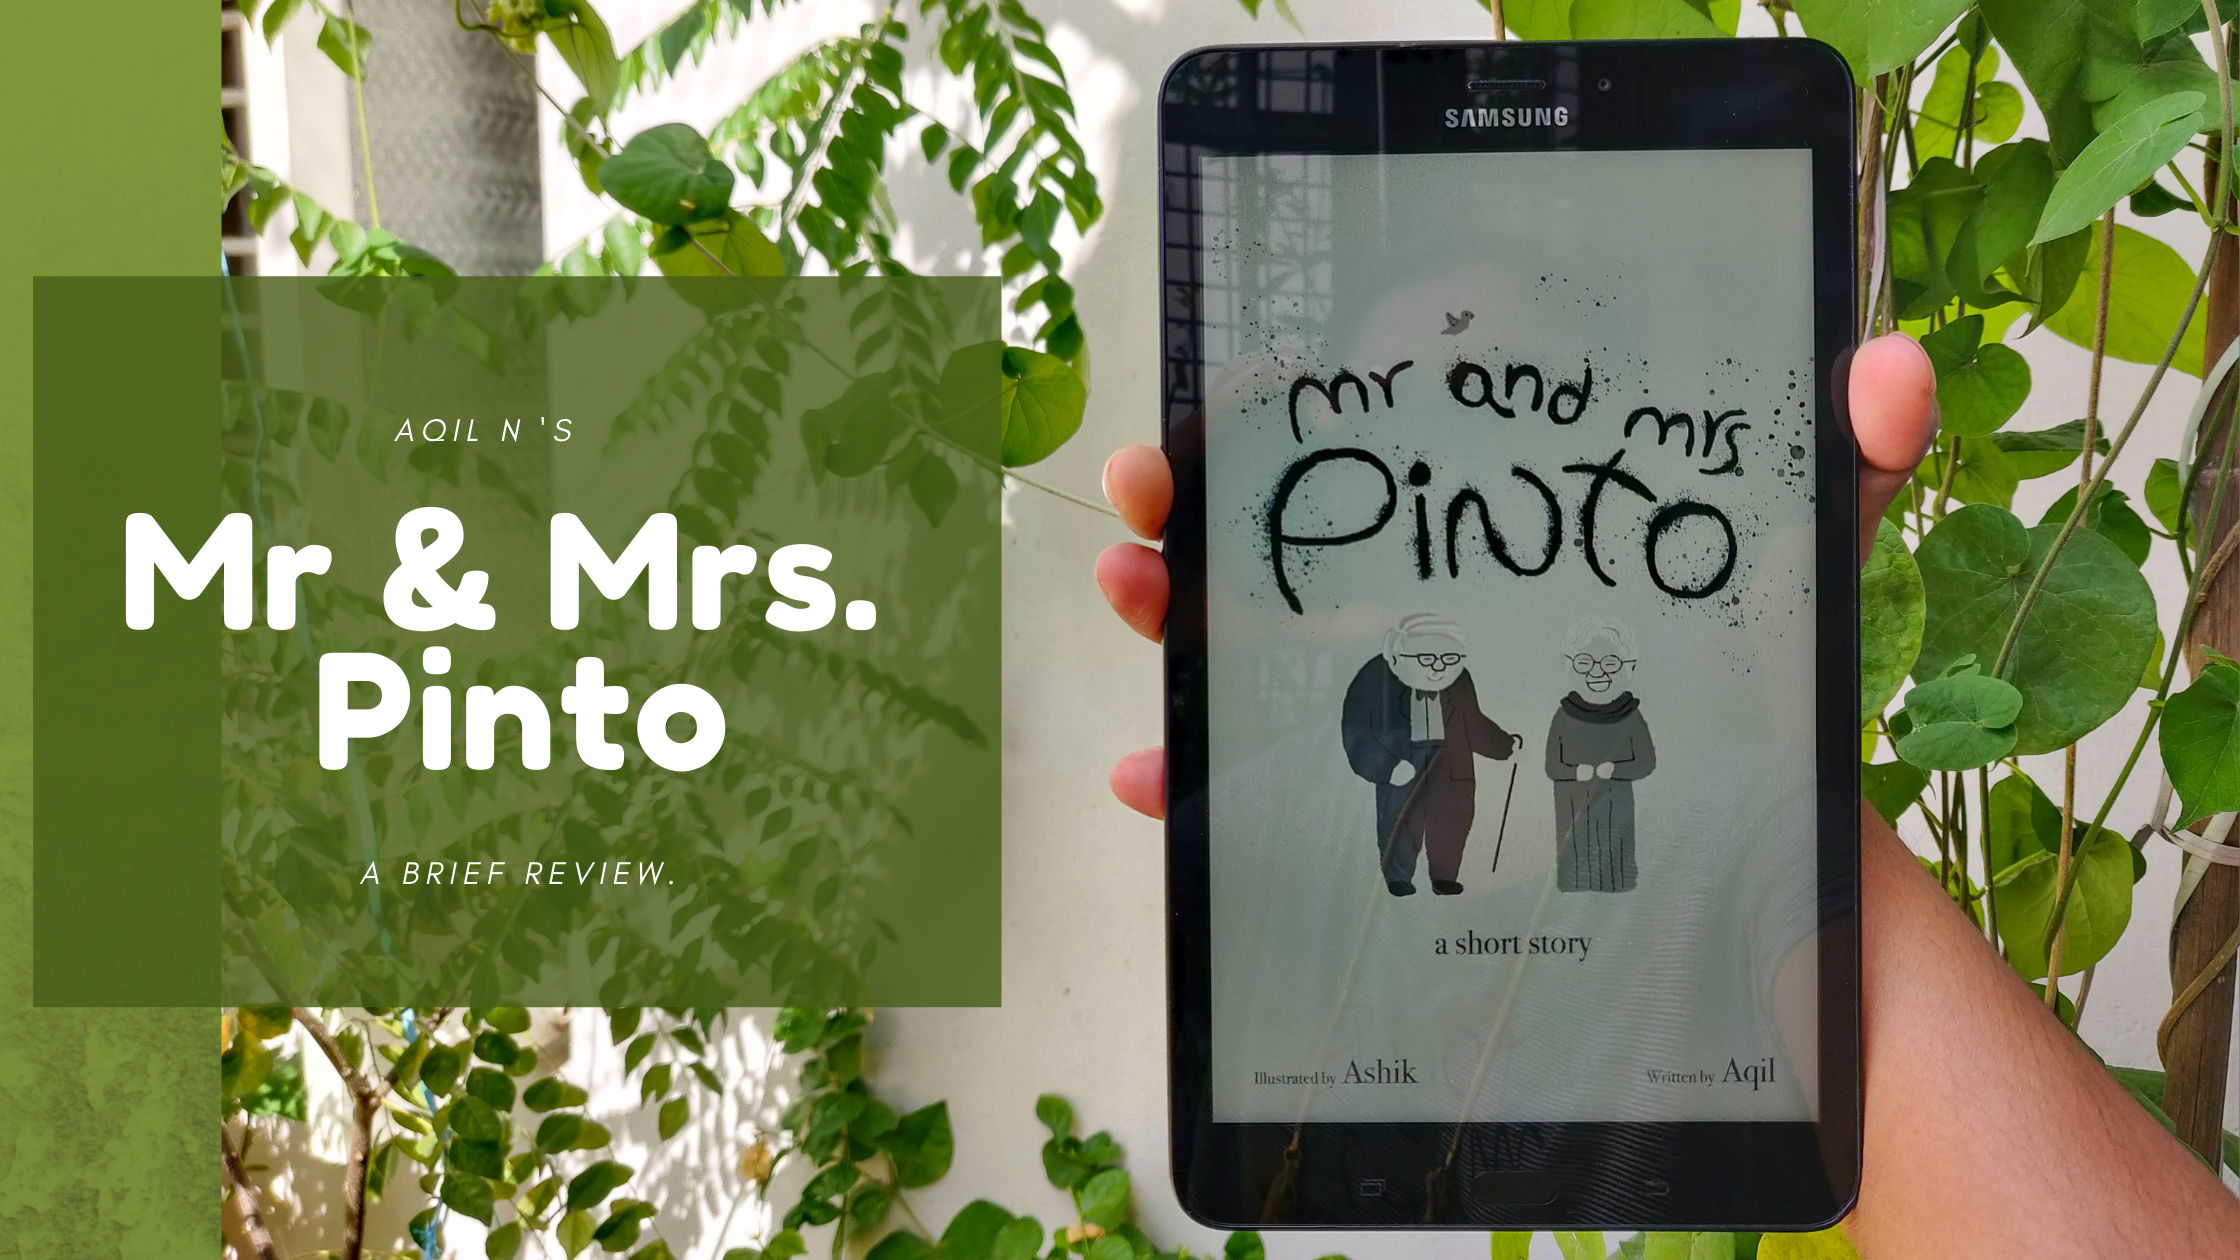 Mr & Mrs Pinto by Aqil N | A brief review